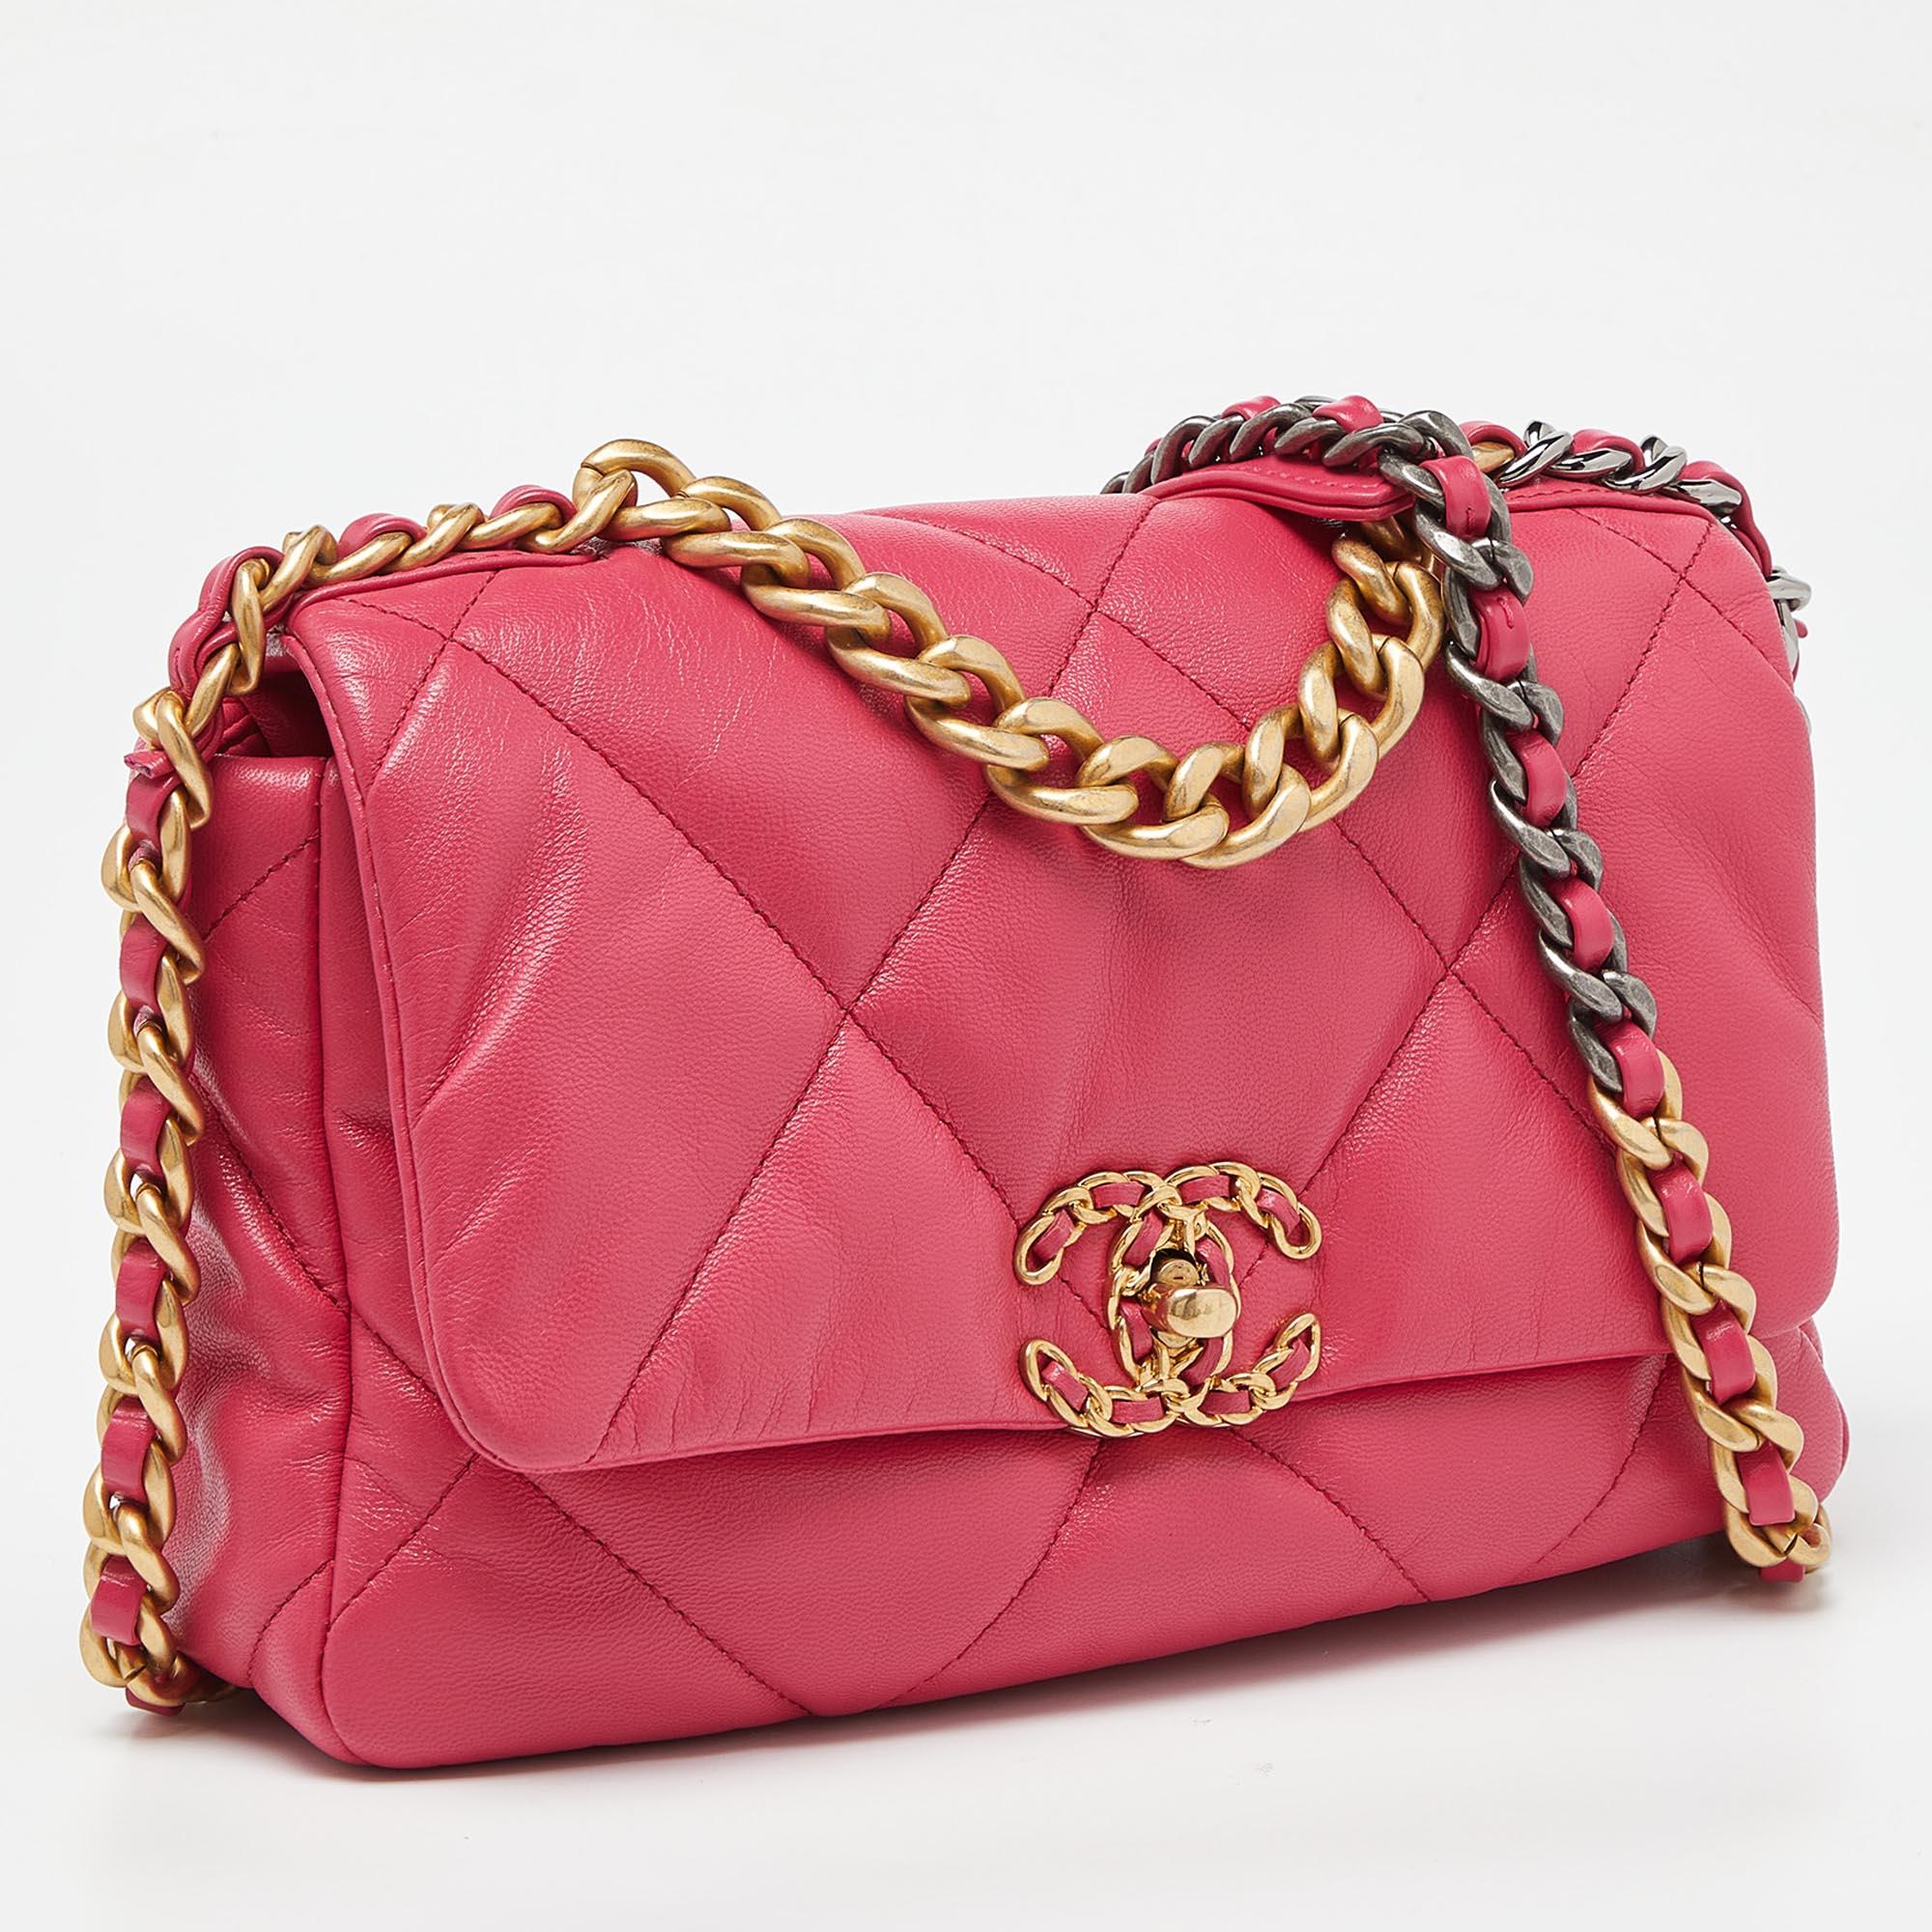 Chanel Pink Quilted Leather Medium 19 Flap Top Handle Bag For Sale 7